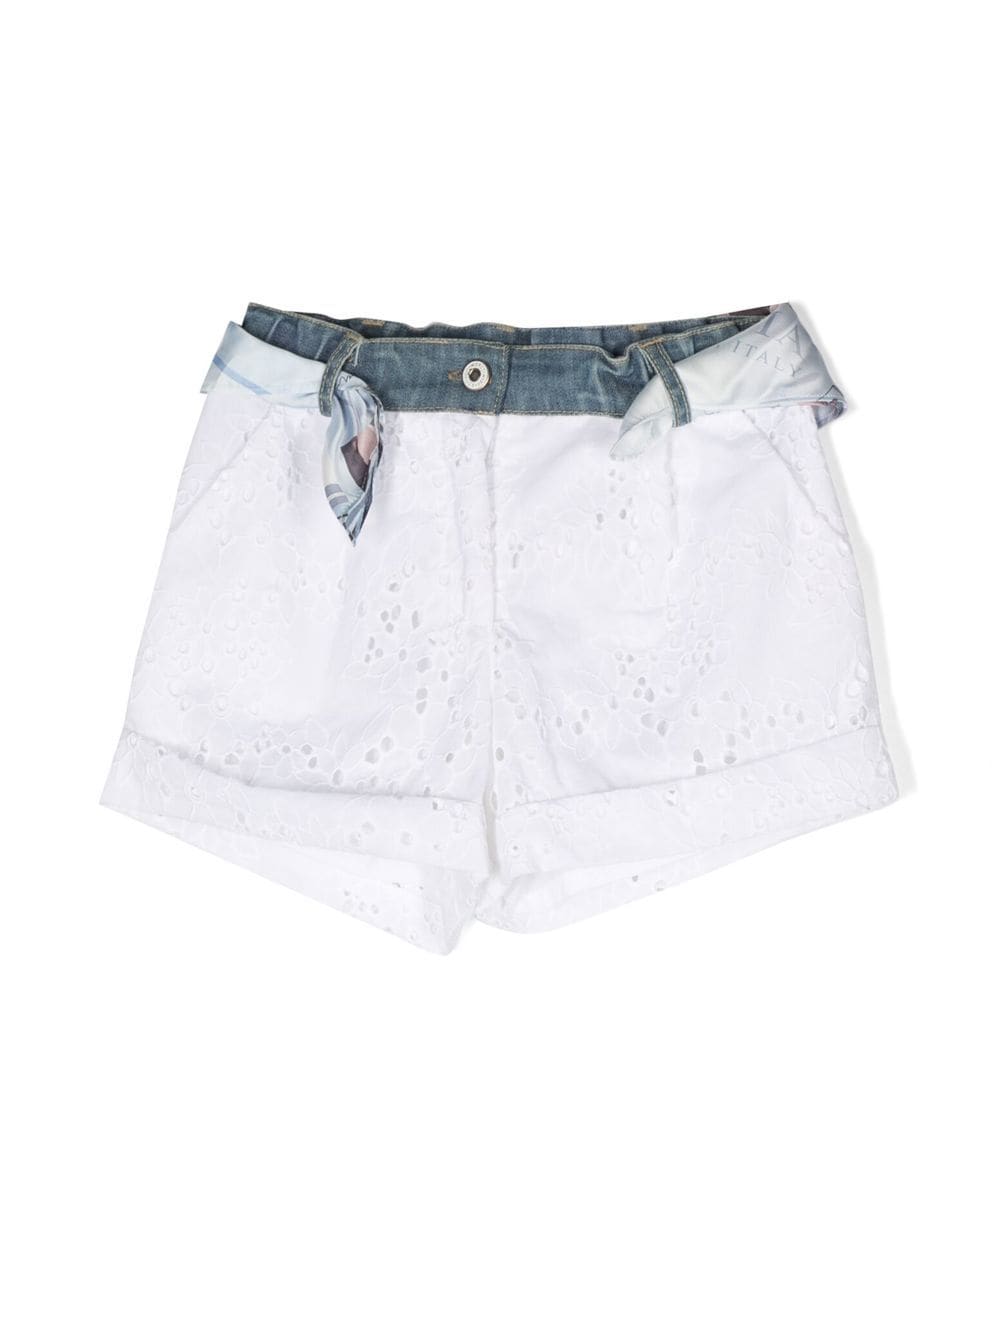 Lapin House embroidered belted shorts - White von Lapin House